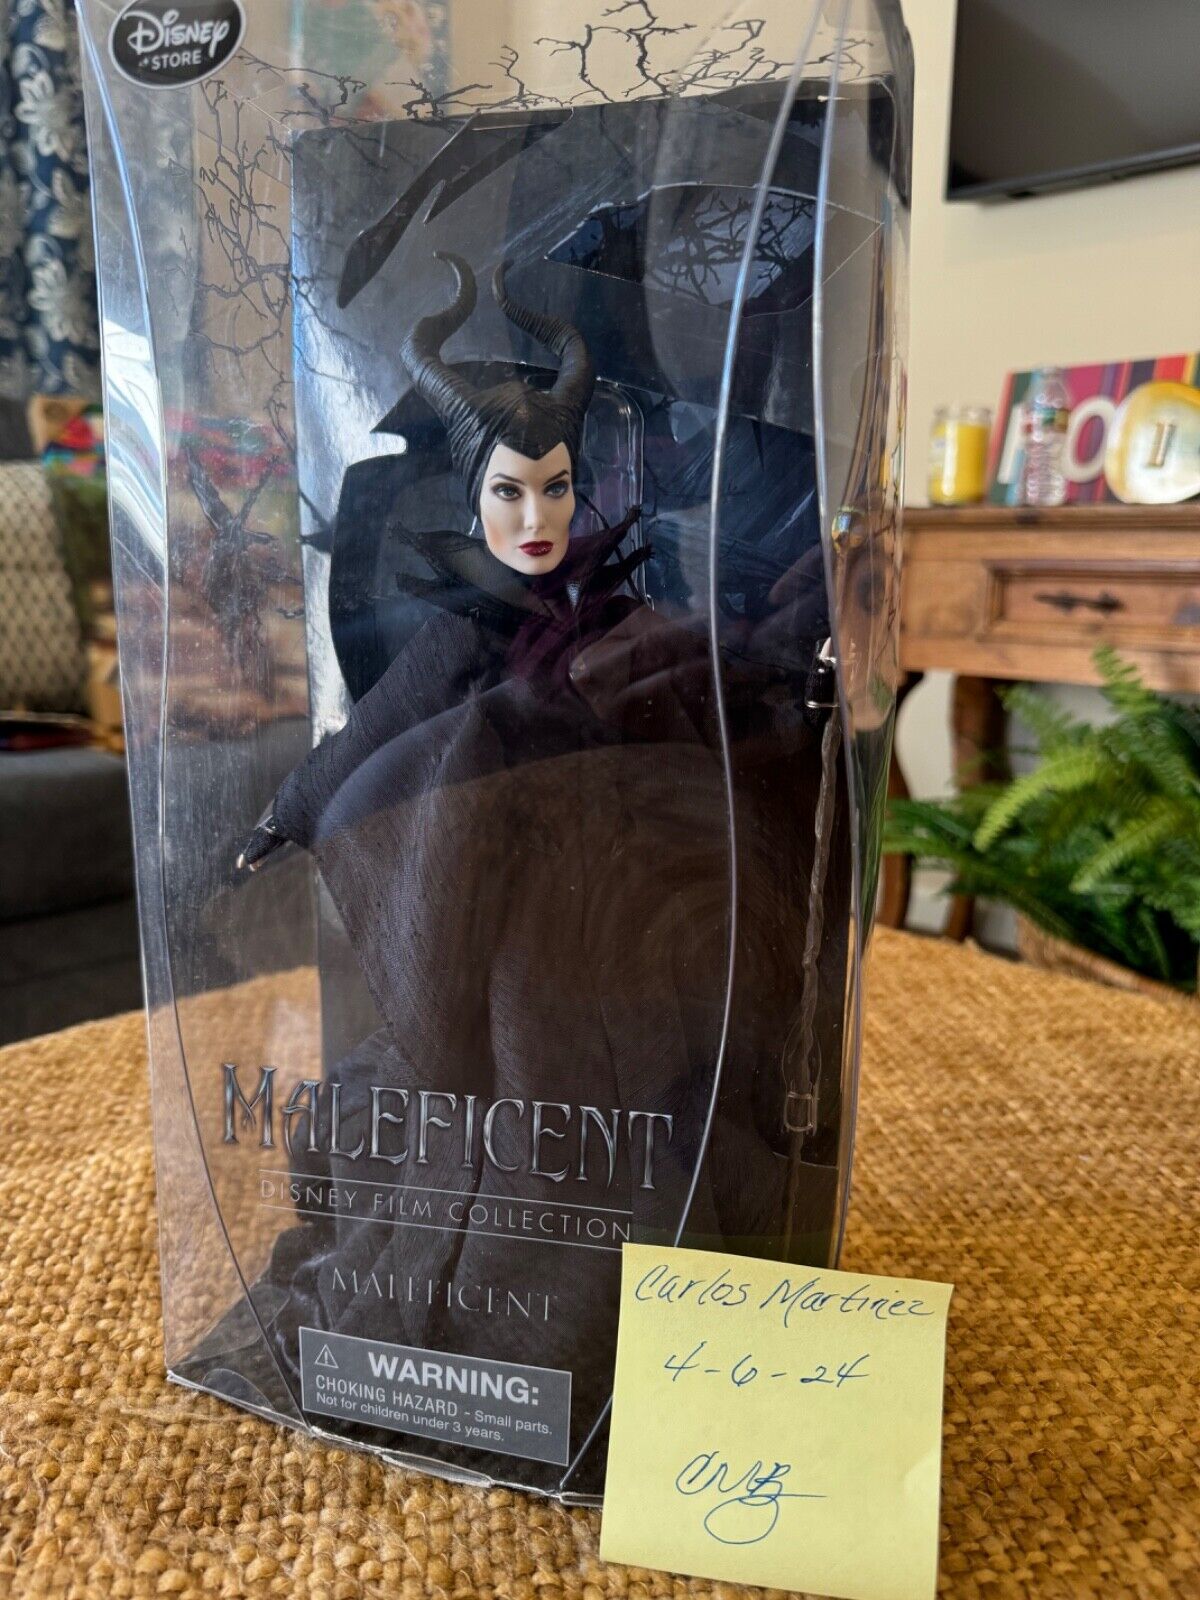 Disney Film Collection Maleficent Exclusive 12-Inch Doll